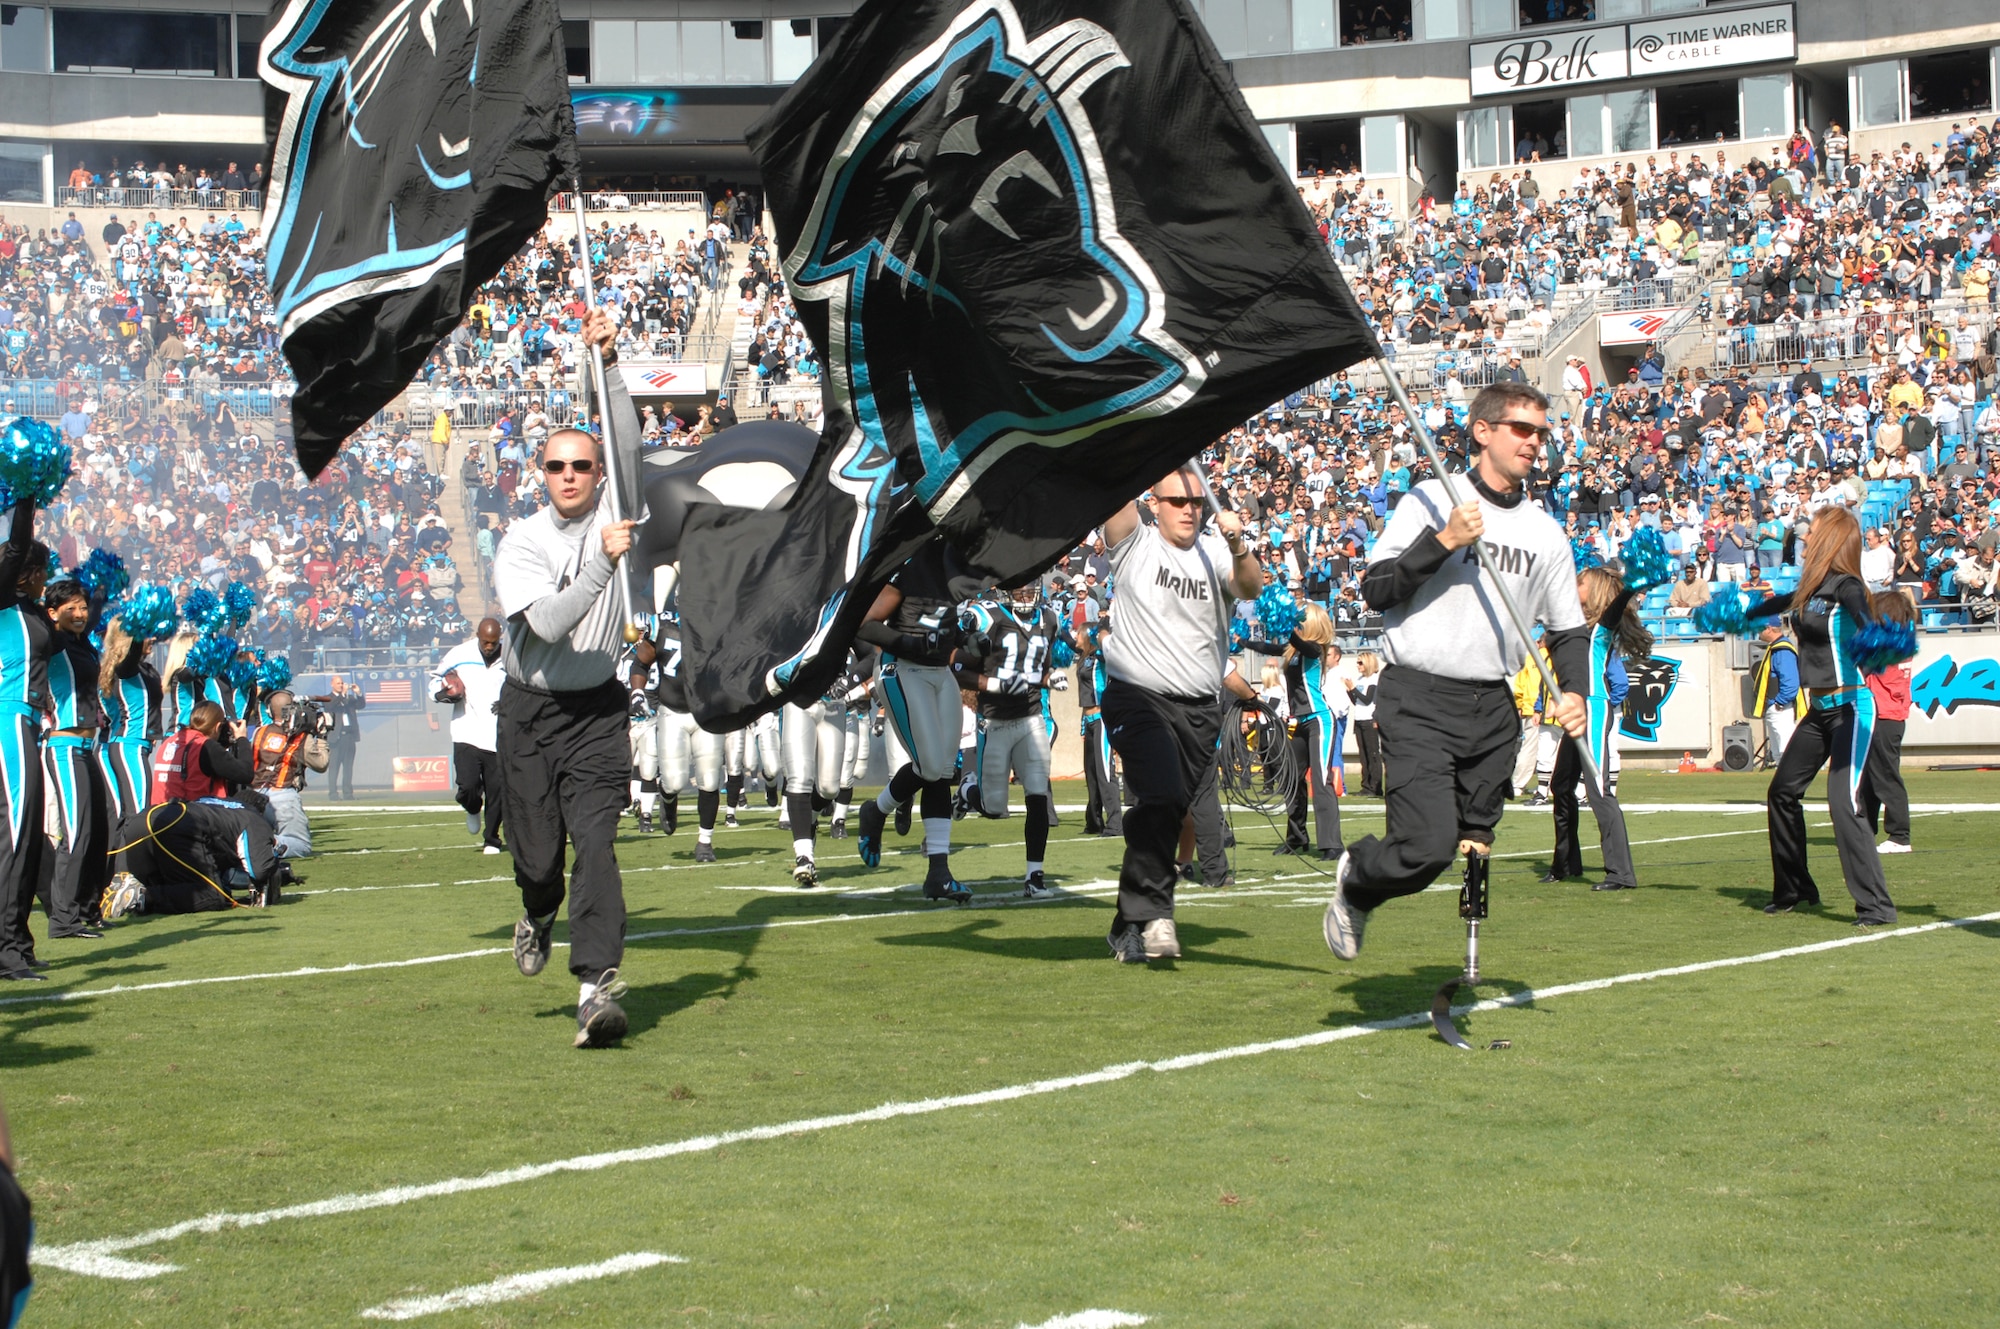 CHARLOTTE, N.C. -- In honor of Veterans Day, members of the Wounded Warrior Project lead the Carolina Panthers onto the field Nov. 11 before the Panthers/Falcons game. The mission of the Wounded Warrior Project is to raise public awareness and enlist the public's aid for the needs of severely injured service men and women, to help severely injured service members to aid and assist each other and to provide unique, direct programs and services to meet their needs. (U.S. Air Force photo/Staff Sgt. Henry Hoegen)
